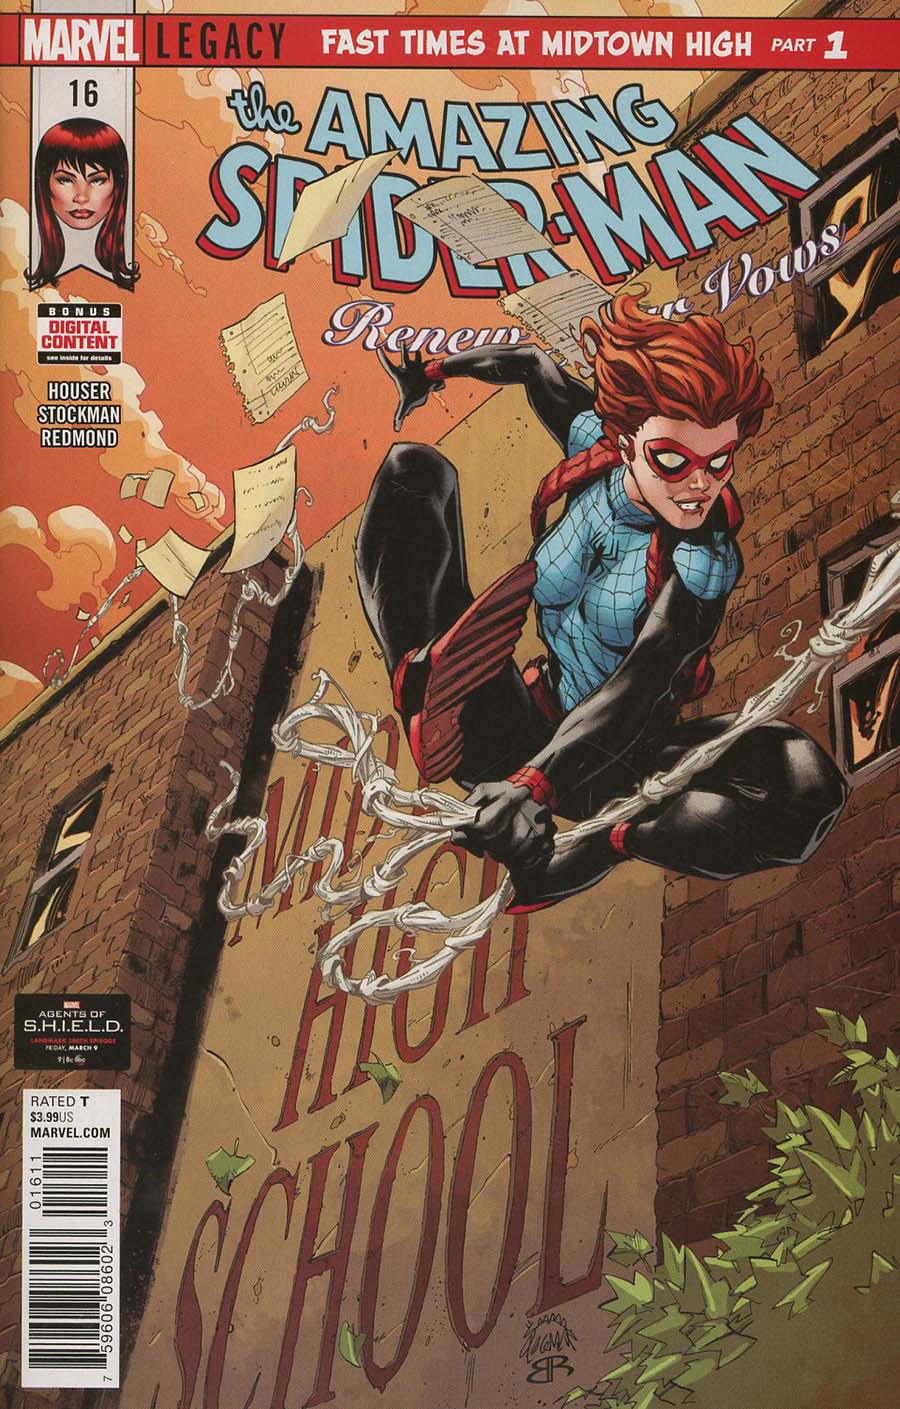 Amazing Spider-Man Renew Your Vows Vol 2 #16 (Marvel Legacy Tie-In)